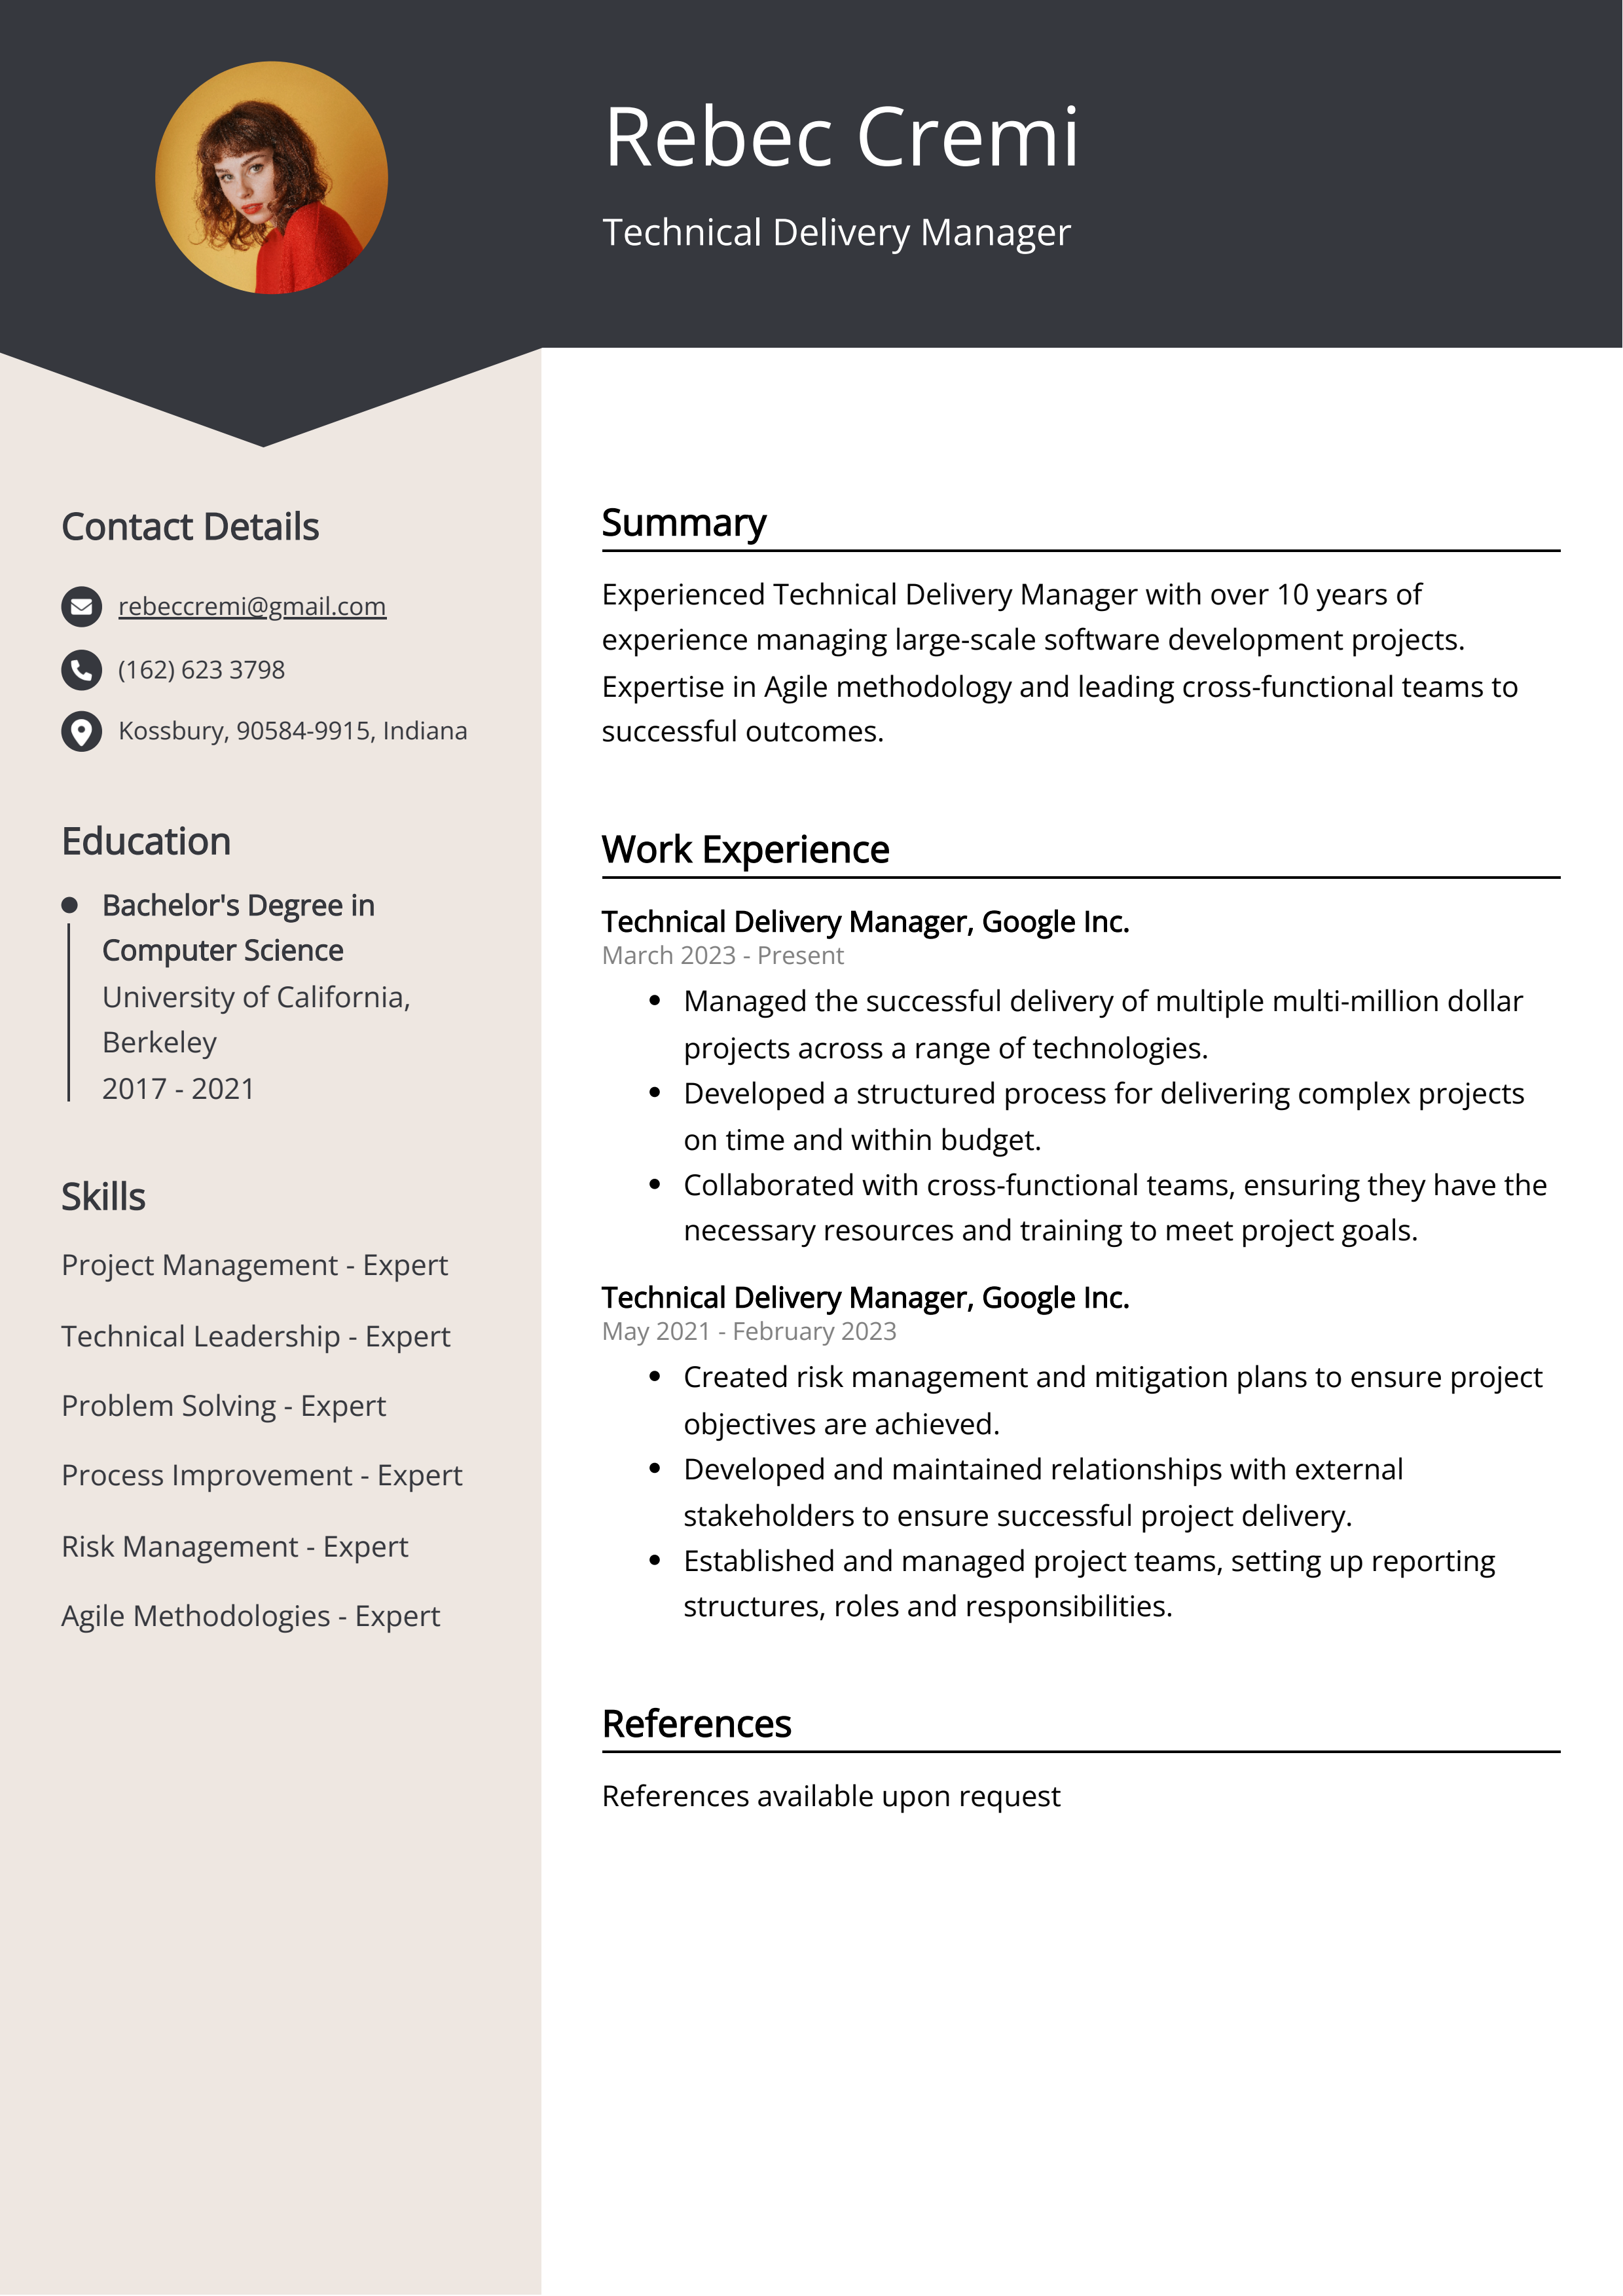 Technical Delivery Manager Resume Example